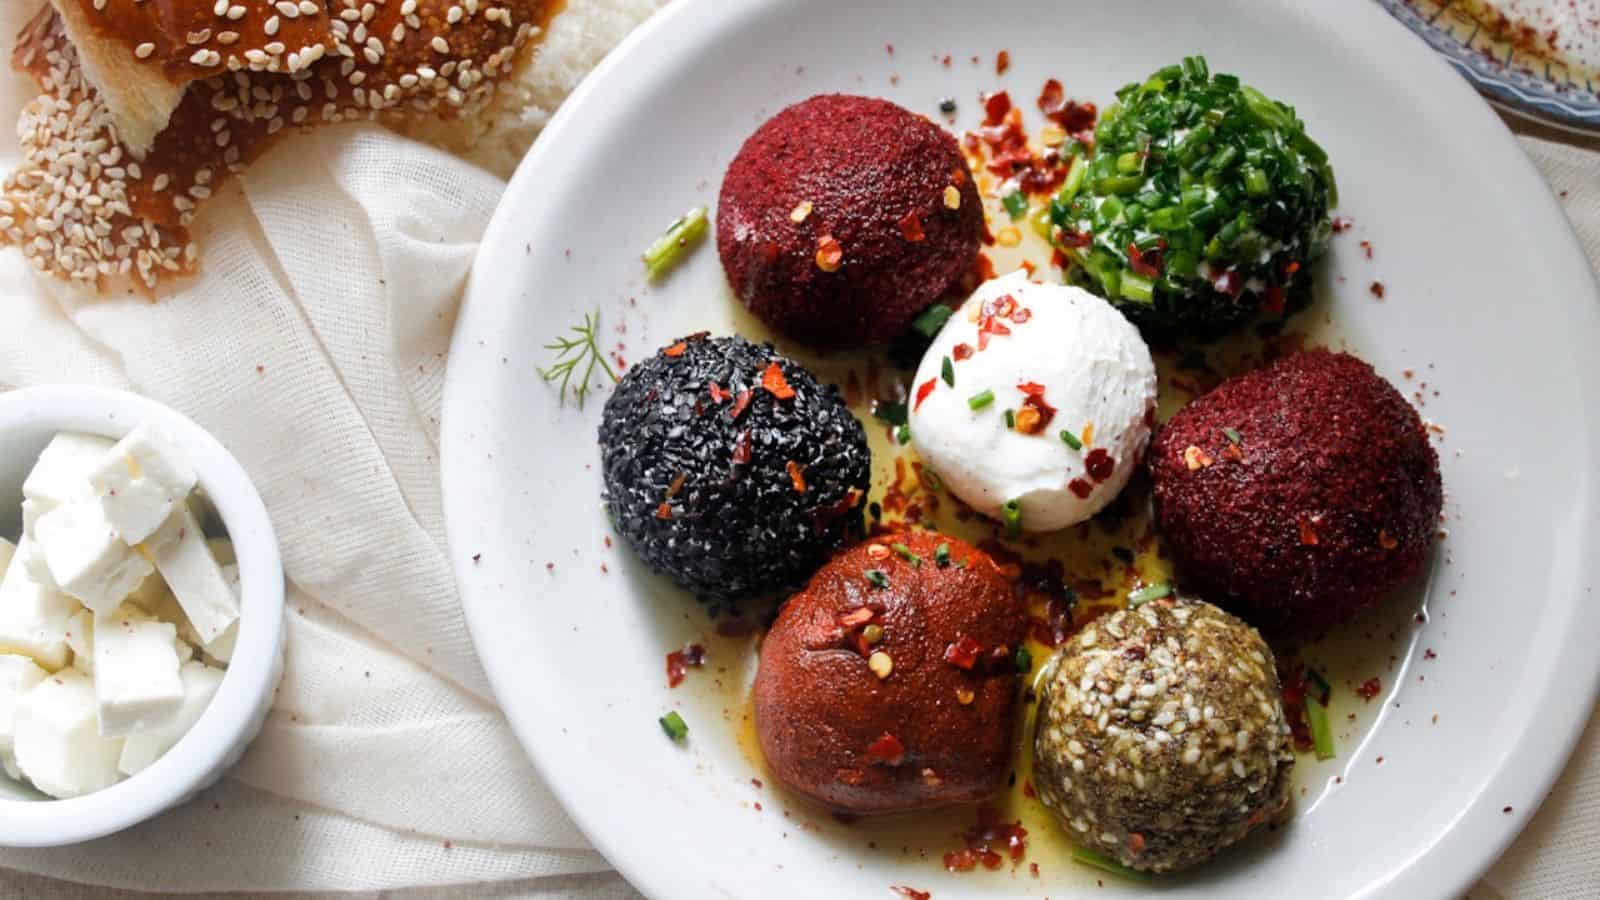 Seven labaneh balls on a plate with olive oil.